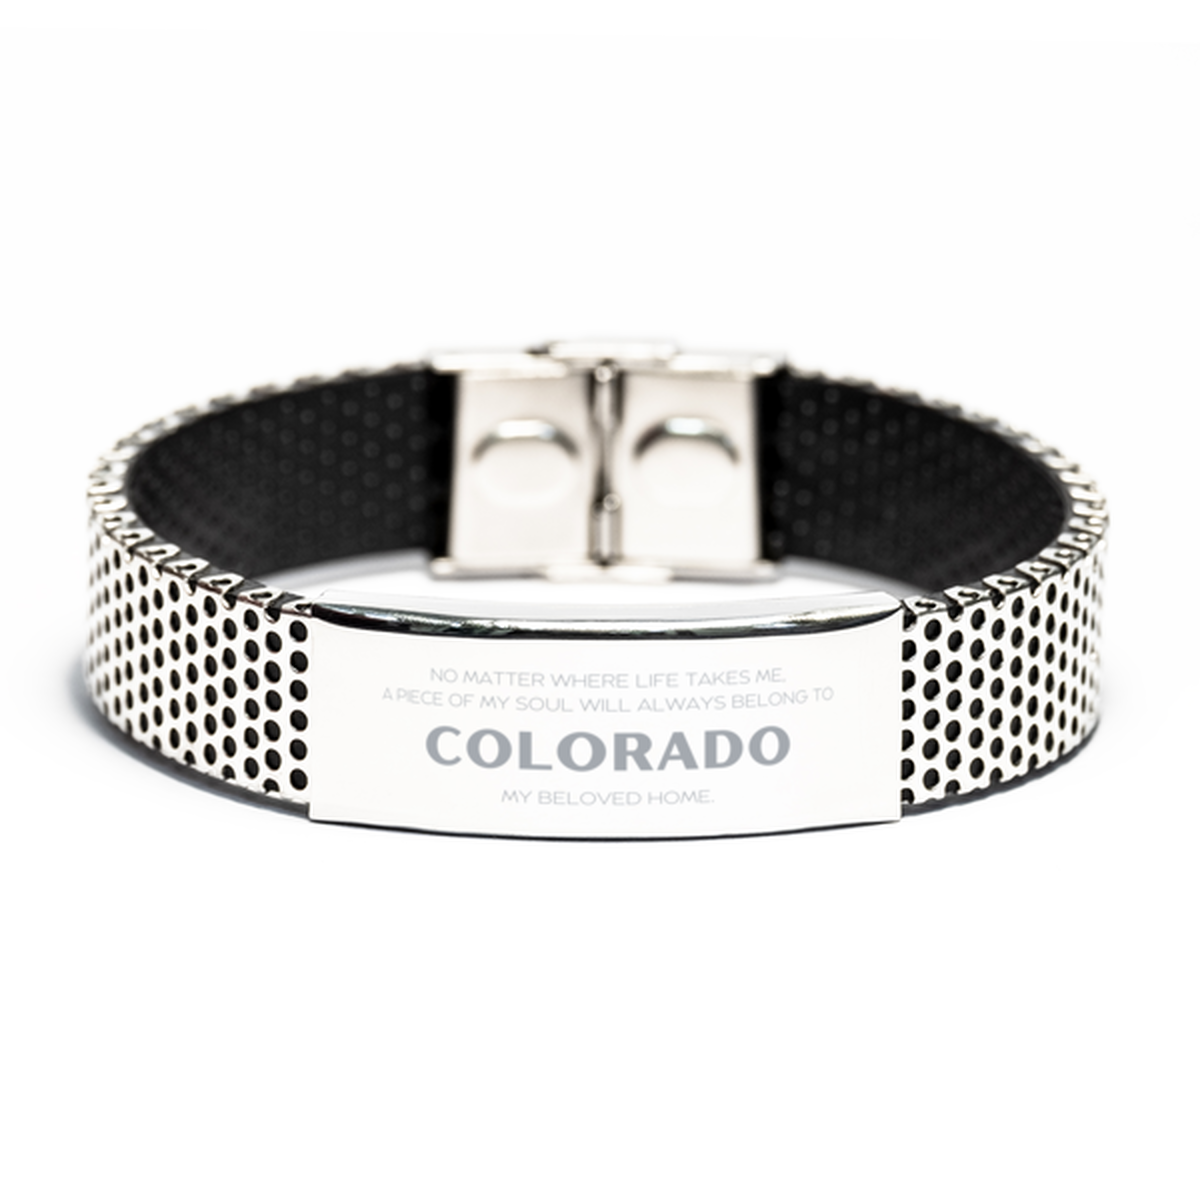 Love Colorado State Gifts, My soul will always belong to Colorado, Proud Stainless Steel Bracelet, Birthday Unique Gifts For Colorado Men, Women, Friends